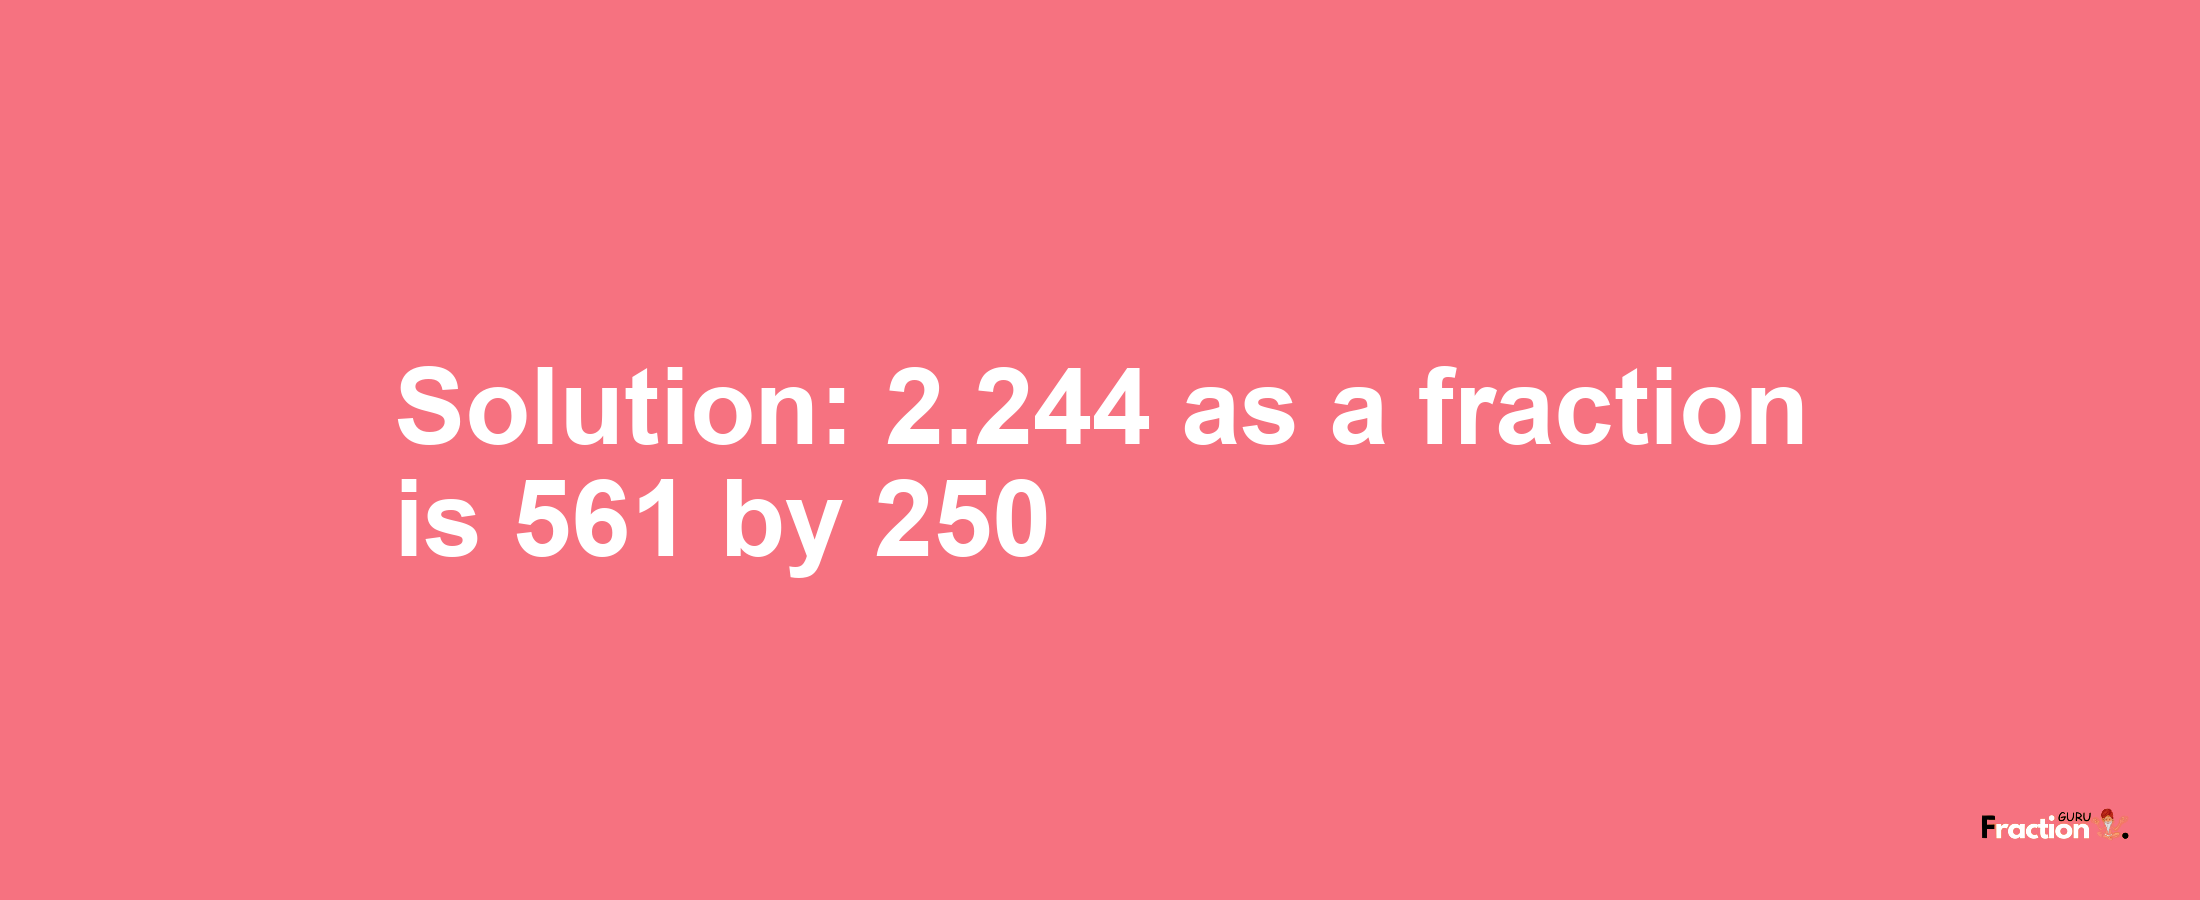 Solution:2.244 as a fraction is 561/250